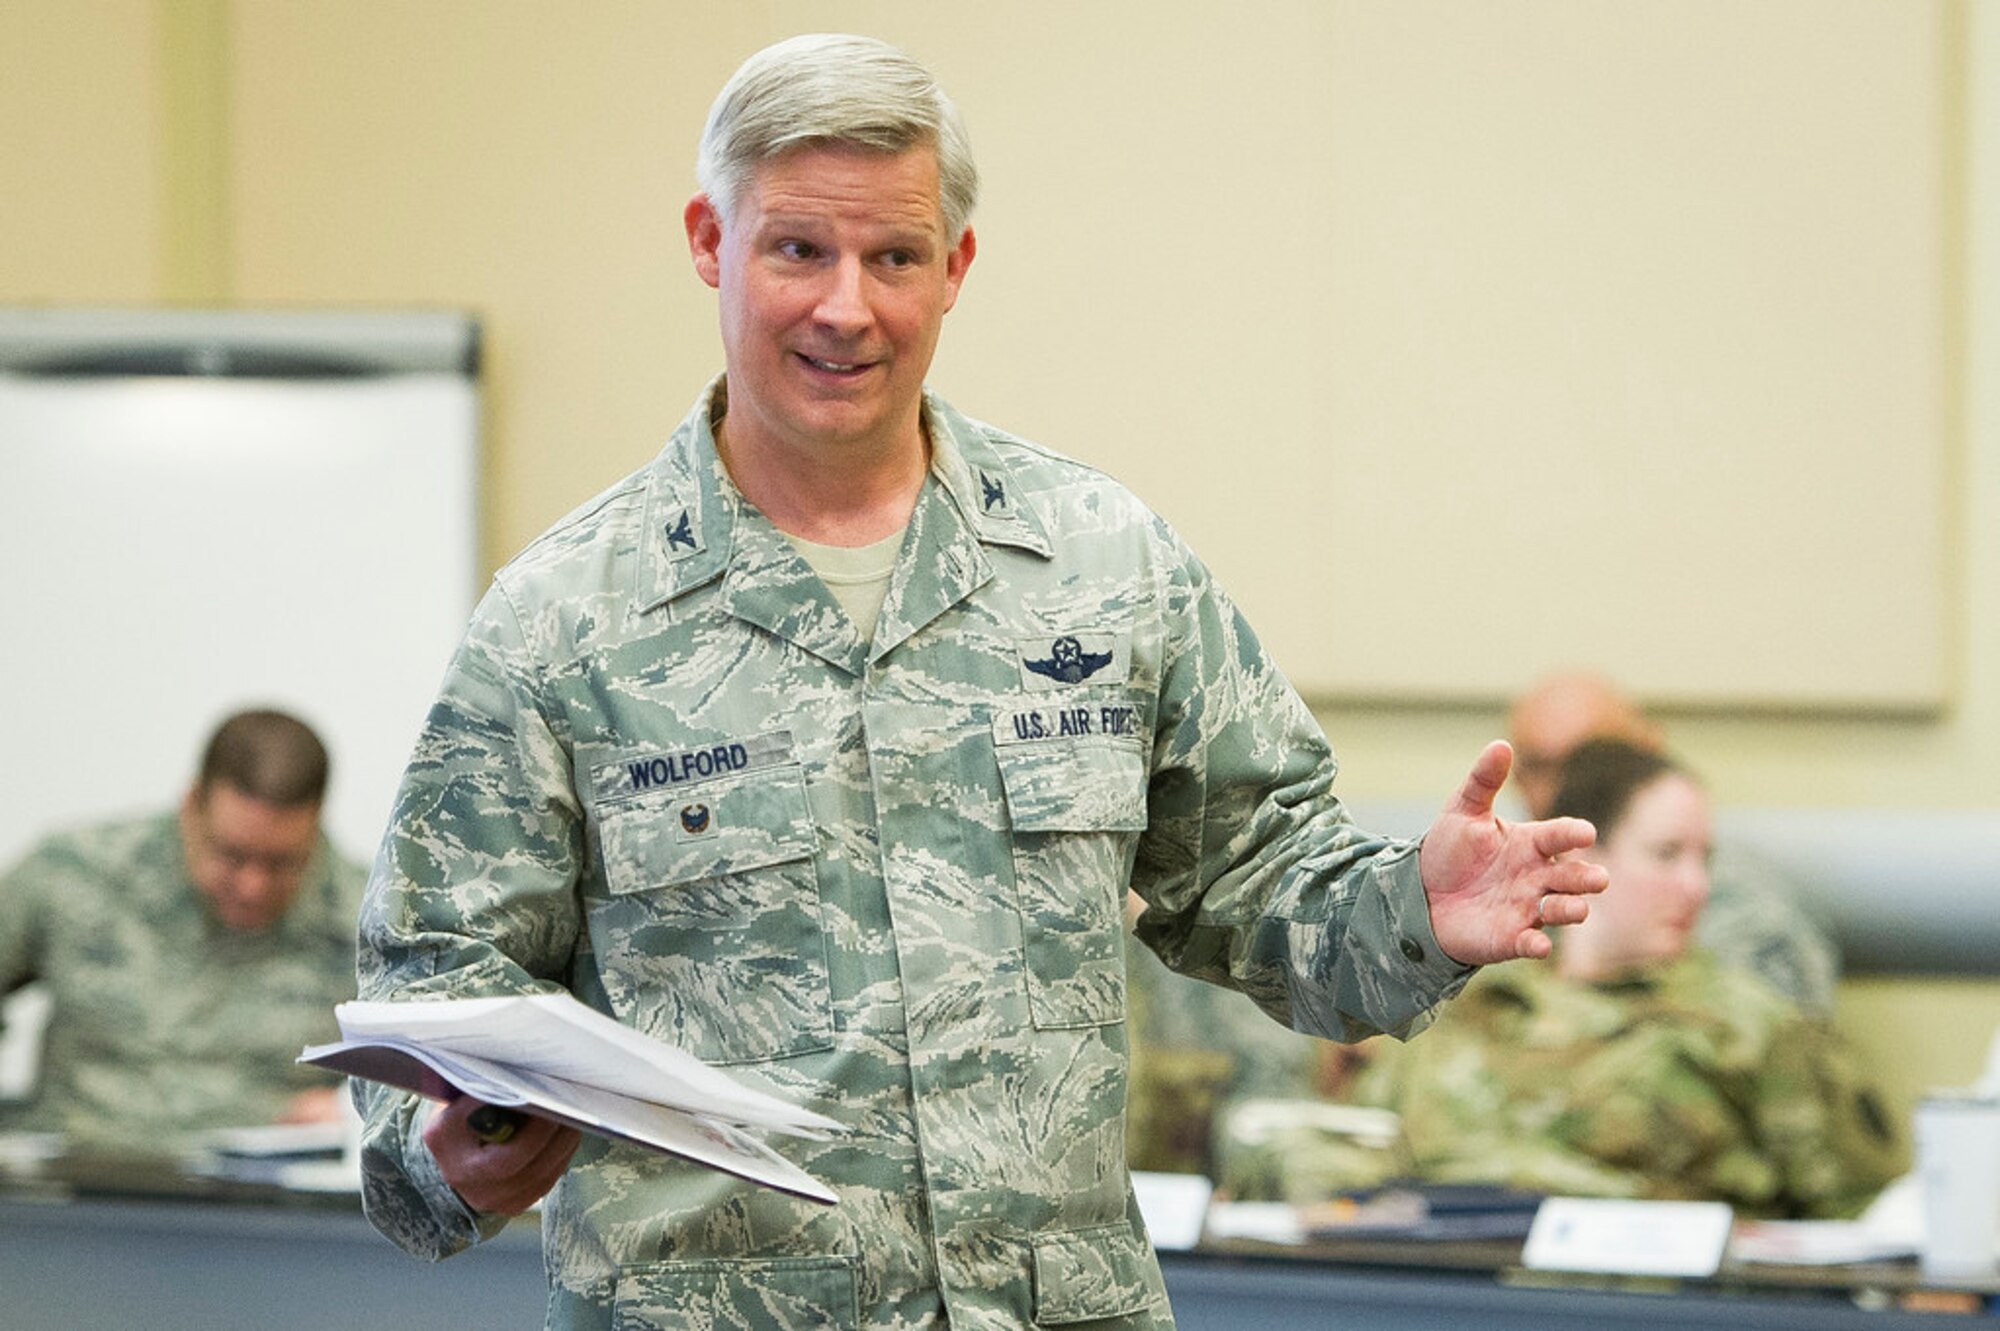 Col. Bryan Wolford, National War College faculty seminar leader, discusses how squadron commanders can impact National Security Strategy objectives during the 2019 AFDW Squadron Commanders Course at Joint Base Andrews, Maryland, April 15, 2019. (U.S. Air Force photo by Master Sgt. Michael B. Keller)